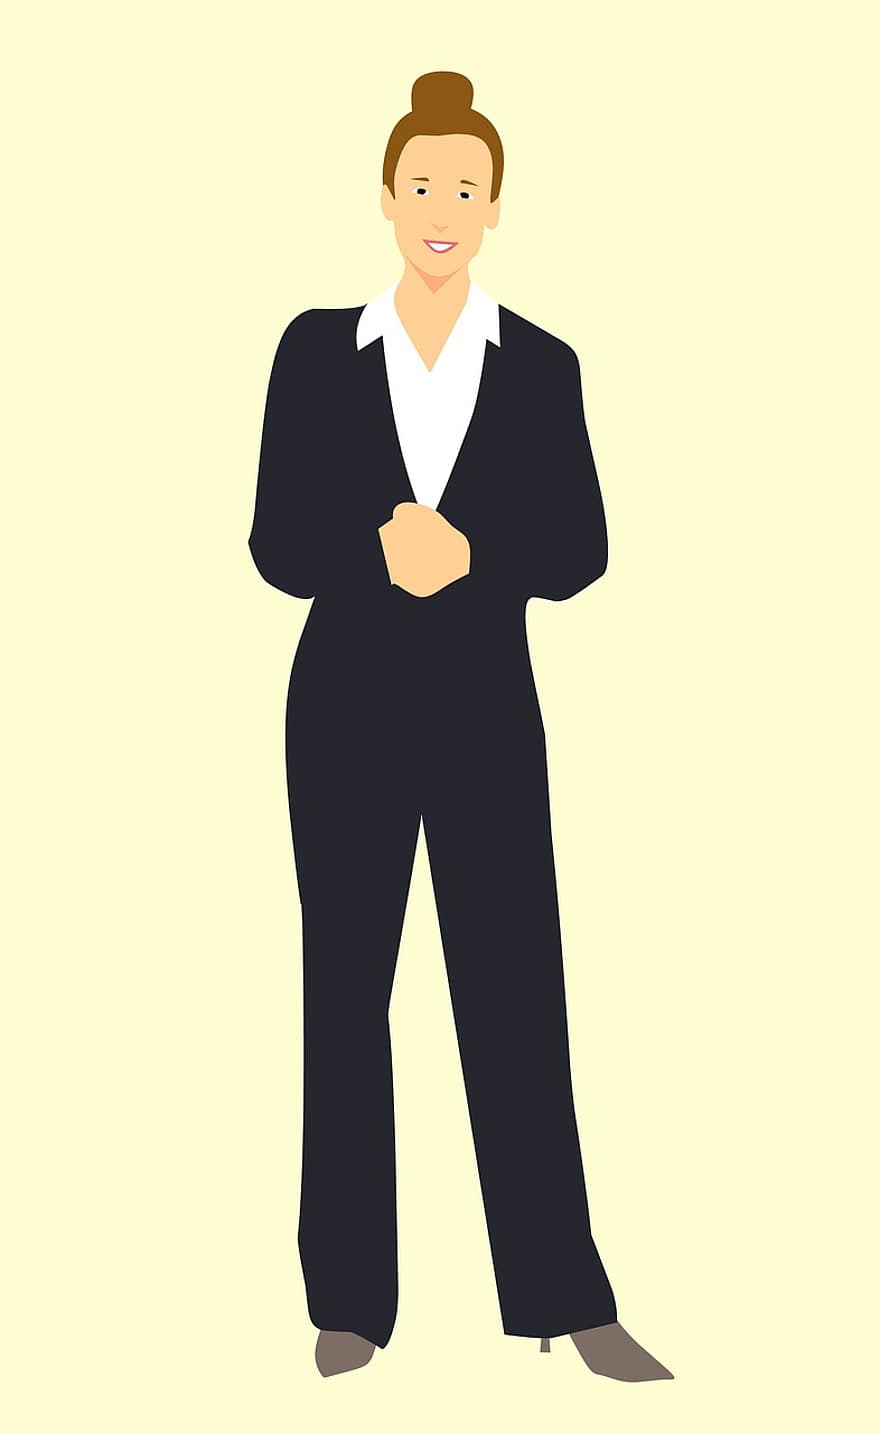 Businesswoman, Women, One Woman Only, Cut Out, Standing, Full Length, Suit, African Ethnicity, Business, Business Person, Professional Occupation